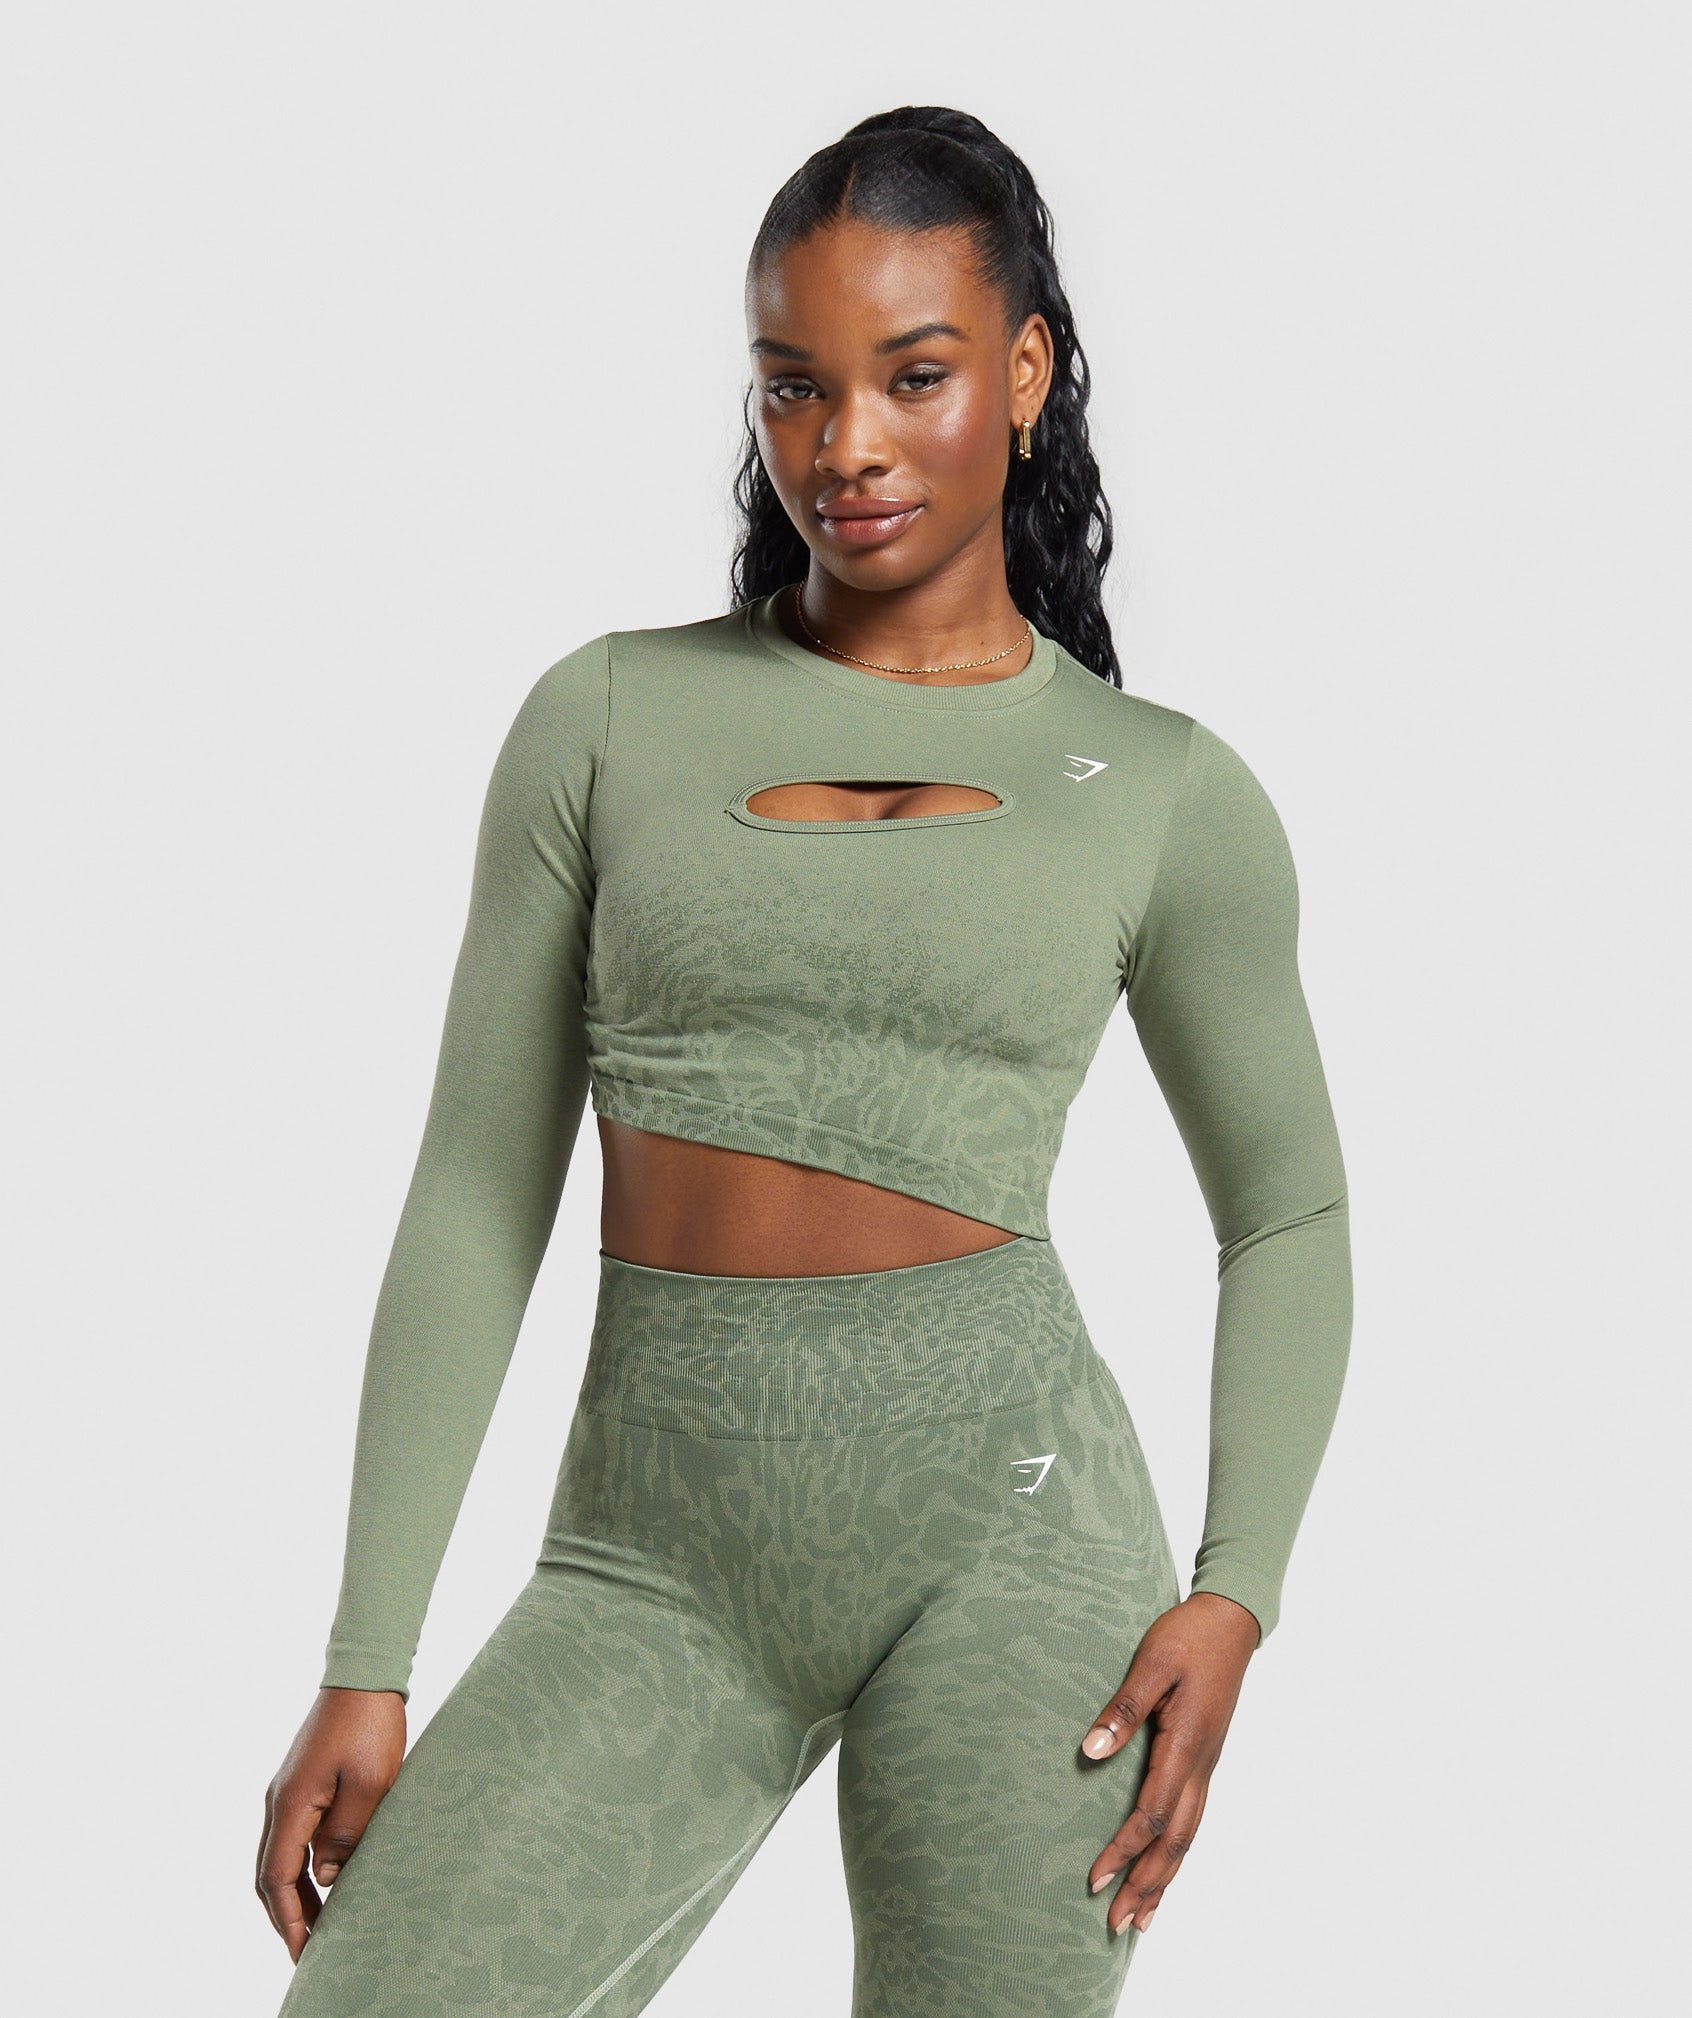 Adapt Pattern Seamless Faded Long Sleeve Top in Force Green/Faded Green